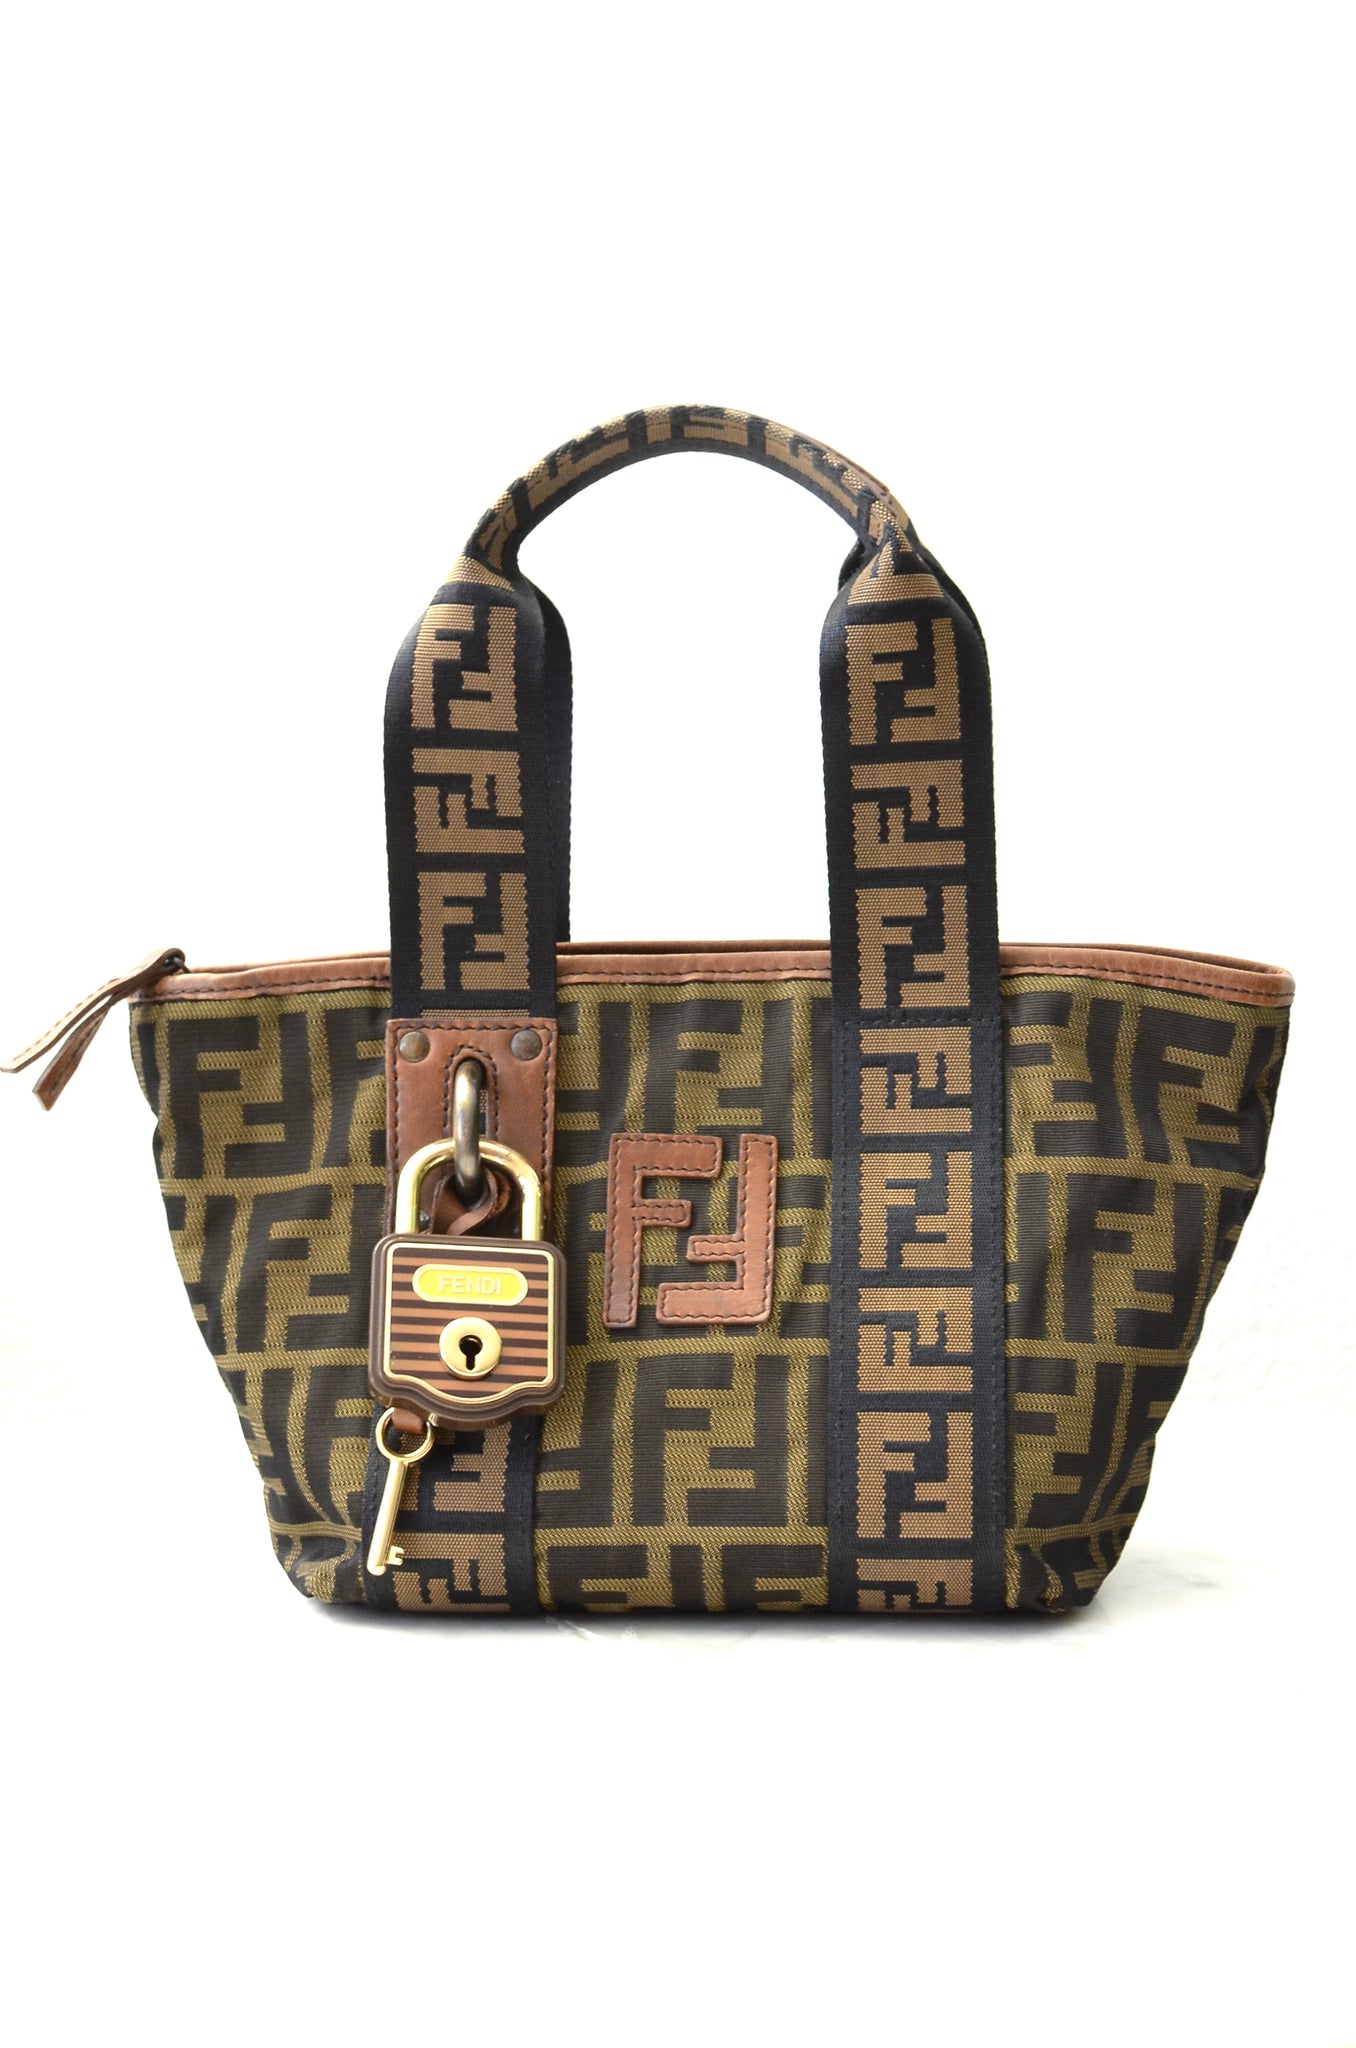 Auth FENDI ZUCCA Tote PM Canvas Leather GHW Vintage